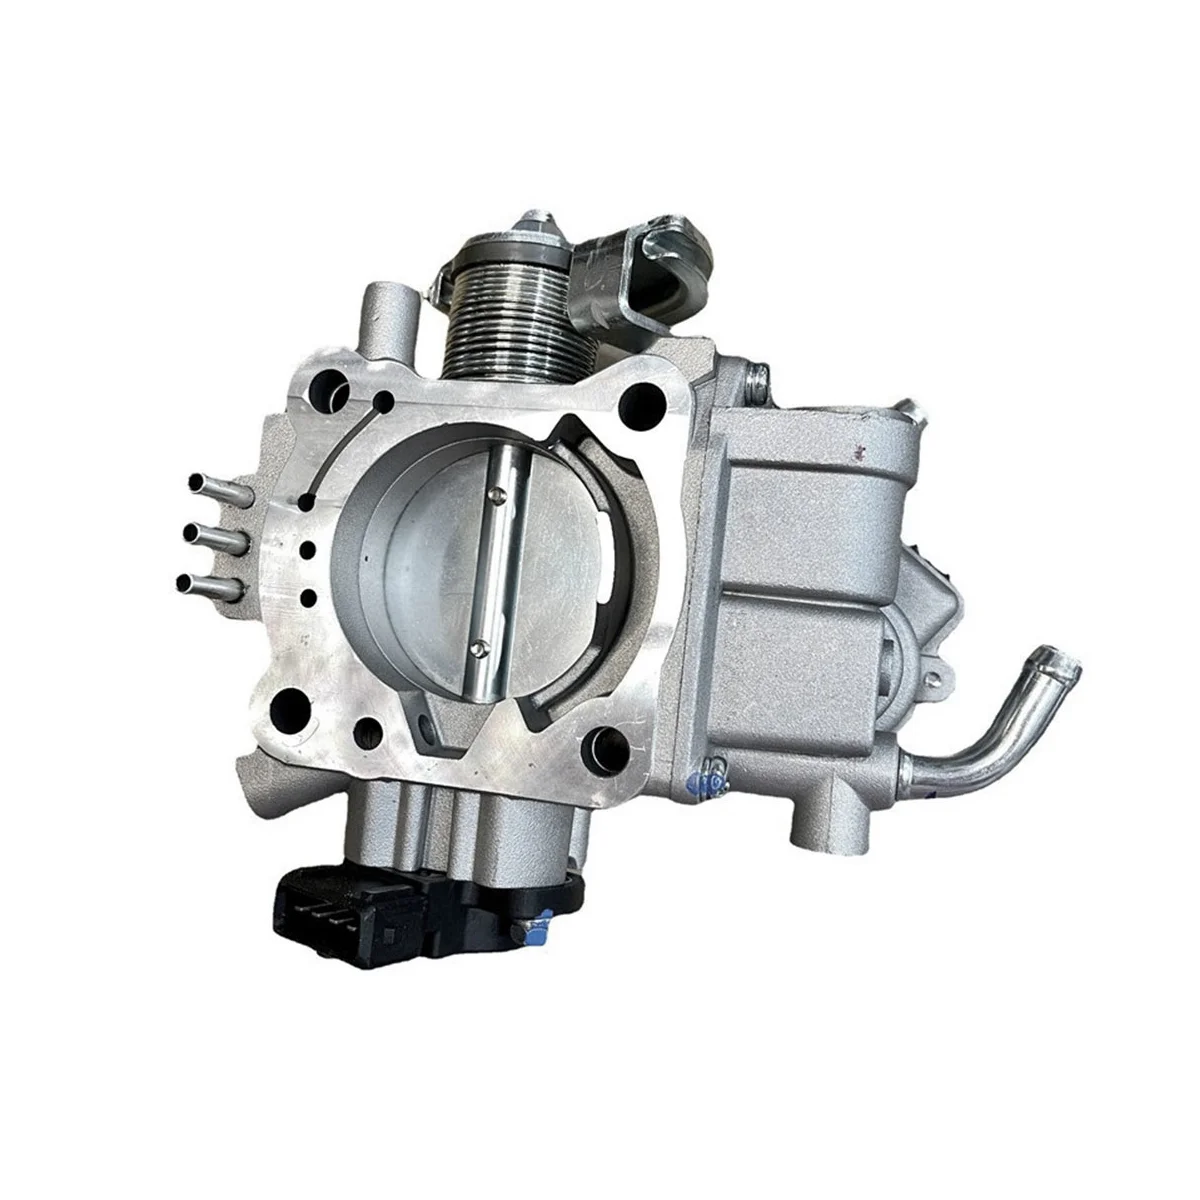 Auto Throttle Body embly for  Galant 2.0L 2WD Engine Code 4G64 4G63 MR579011 MD3 - £360.62 GBP